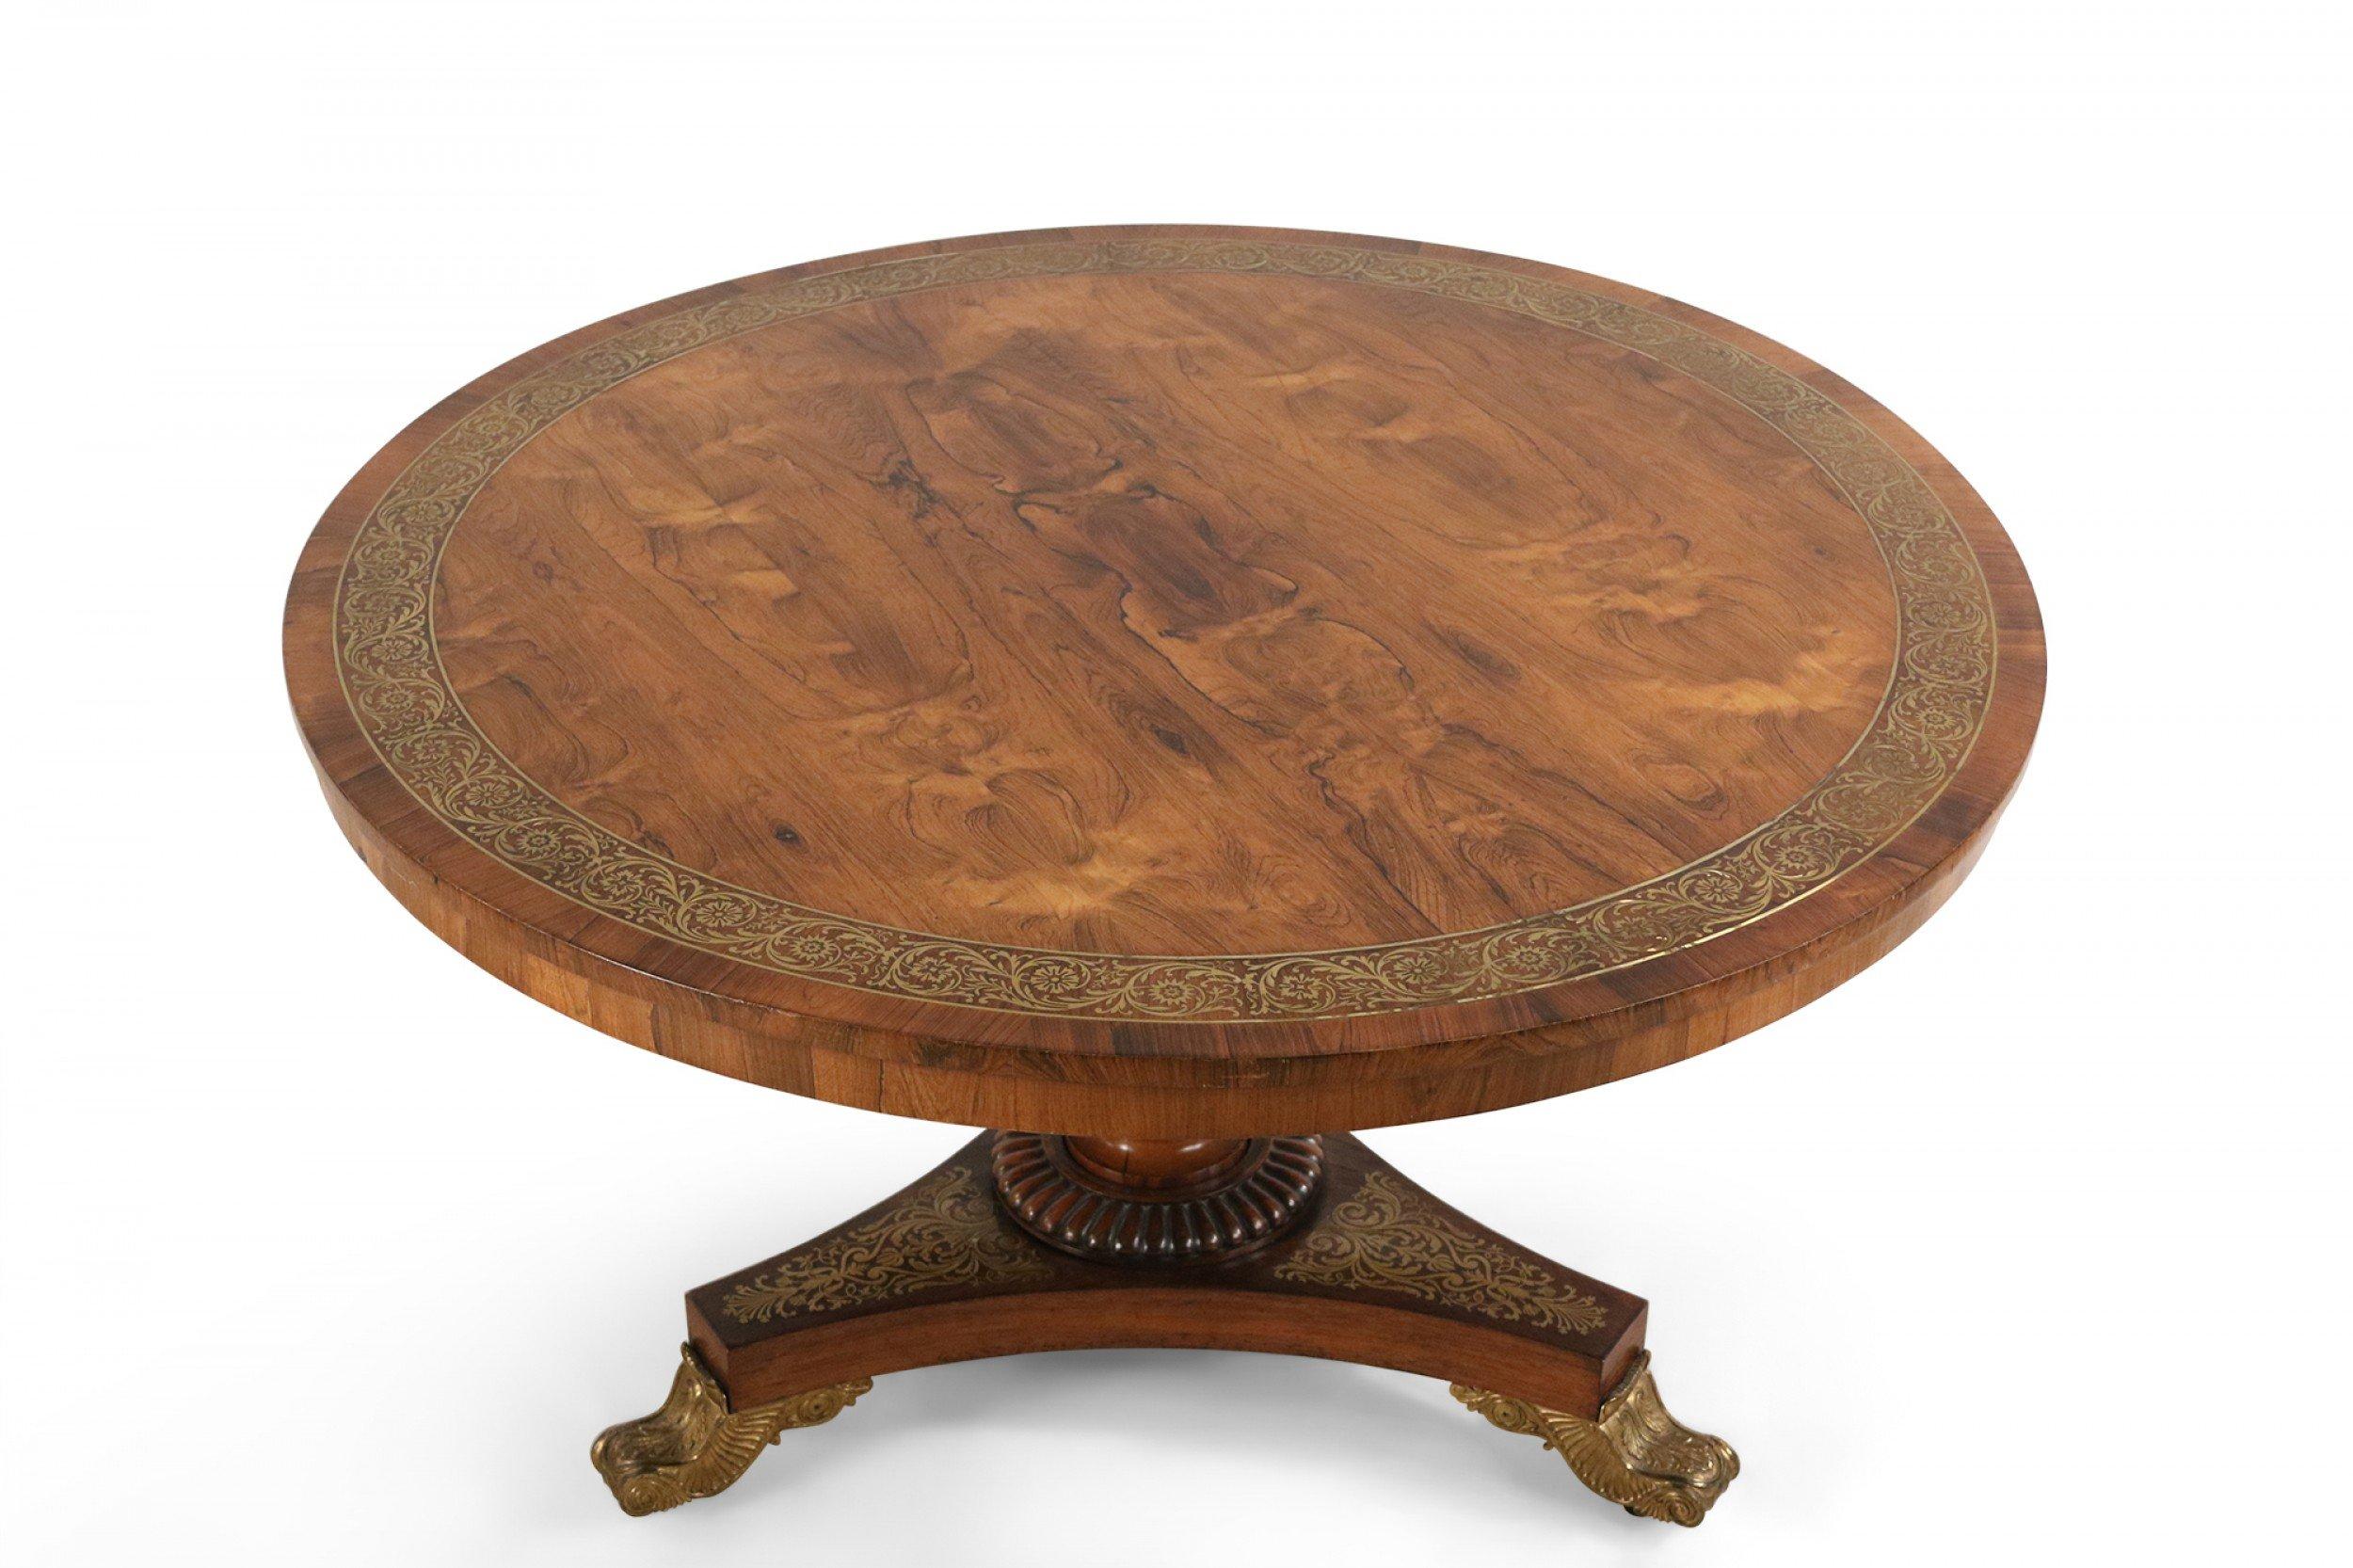 English Regency circular brass inlaid tilt-top center table resting on a turned & fluted trim pedestal over a triangular brass inlaid base supported on 3 gilt bronze shaped feet.